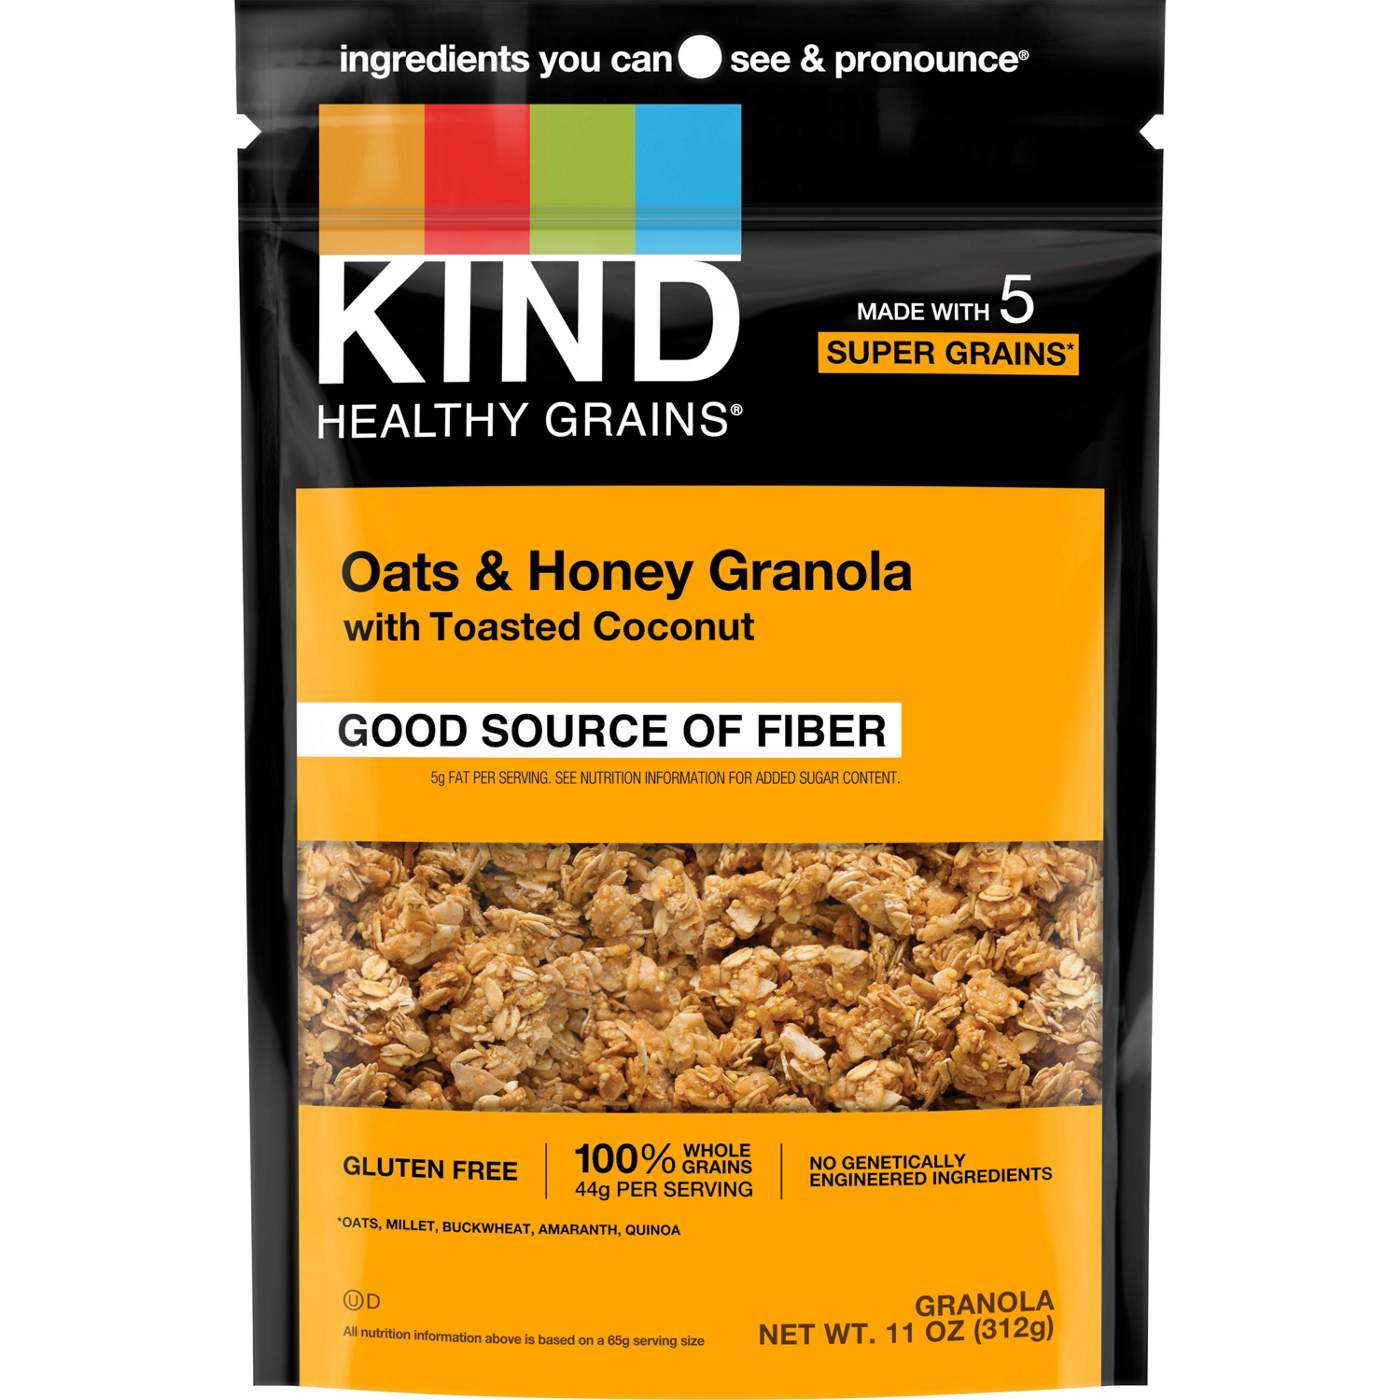 Kind Healthy Grains Granola - Oats & Honey with Coconut; image 1 of 3